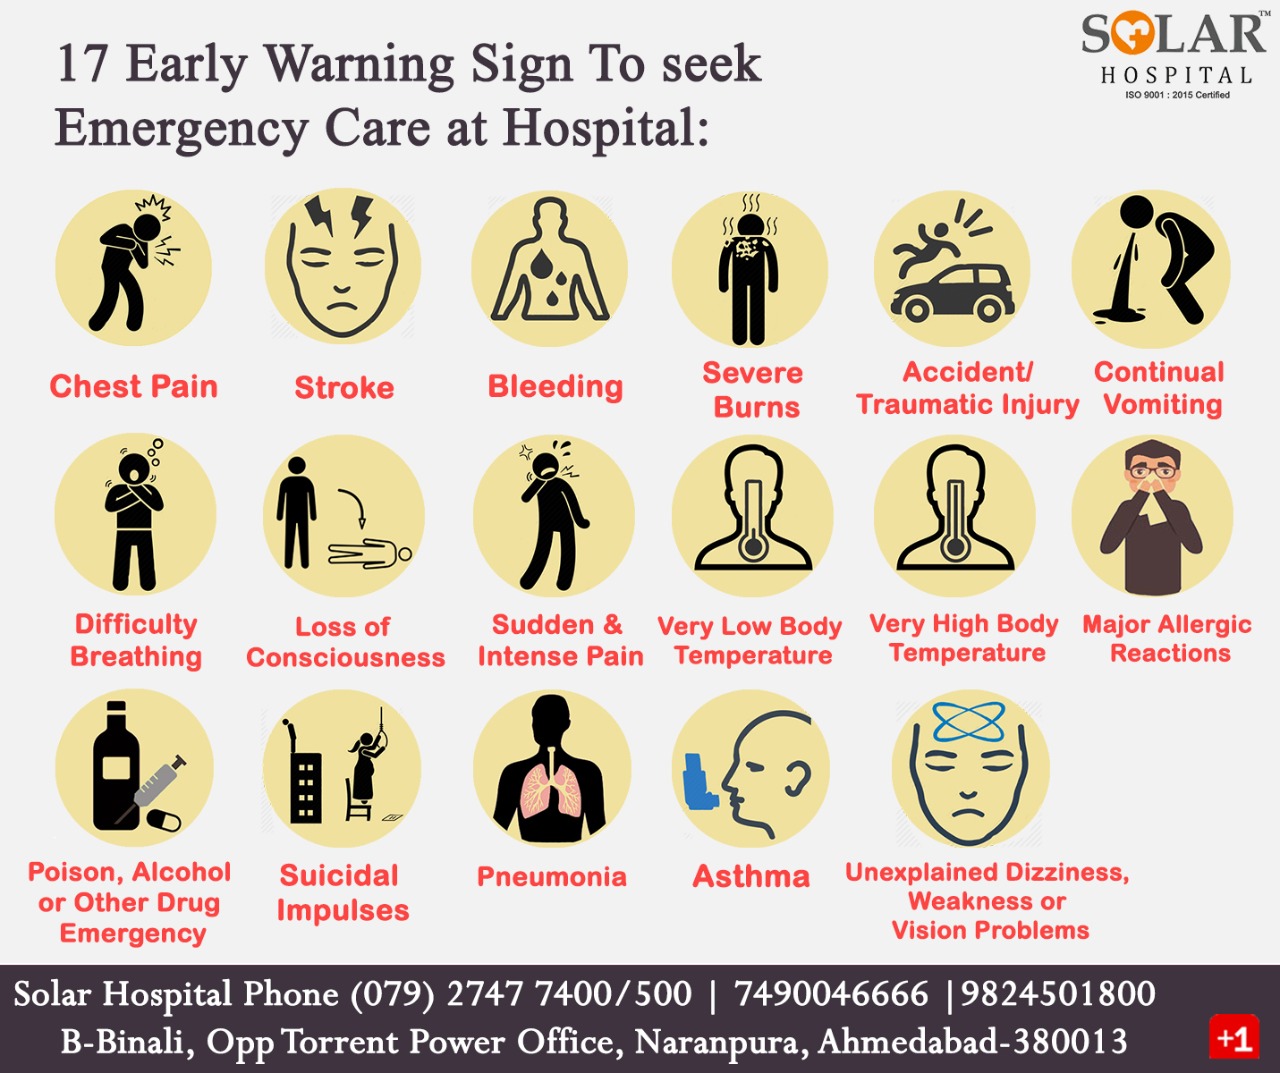 17 Early Warning Sign To Seek Emergency Care At Hospital